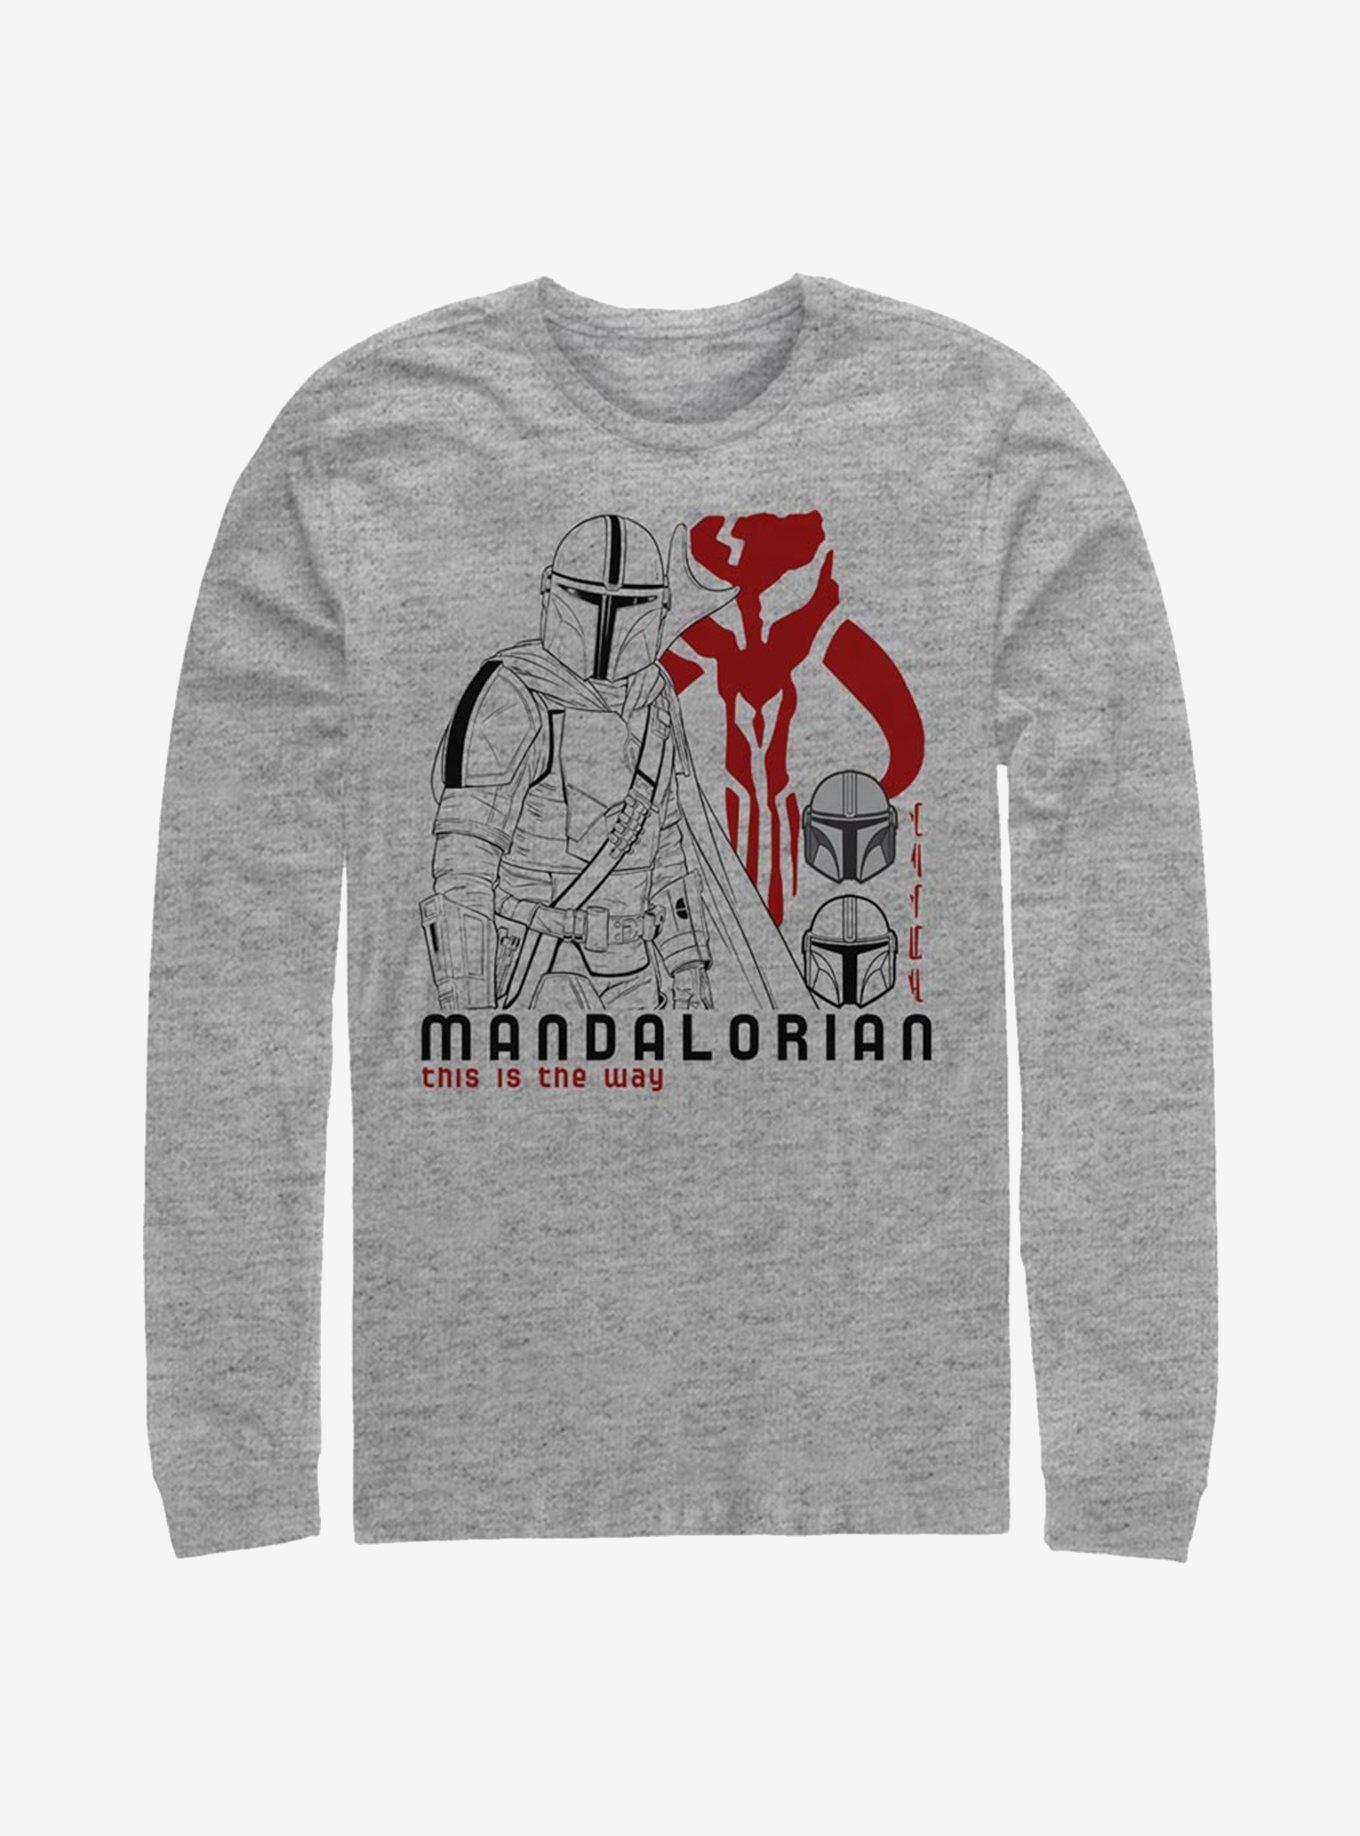 Star Wars The Mandalorian This Is The Way Long-Sleeve T-Shirt, ATH HTR, hi-res